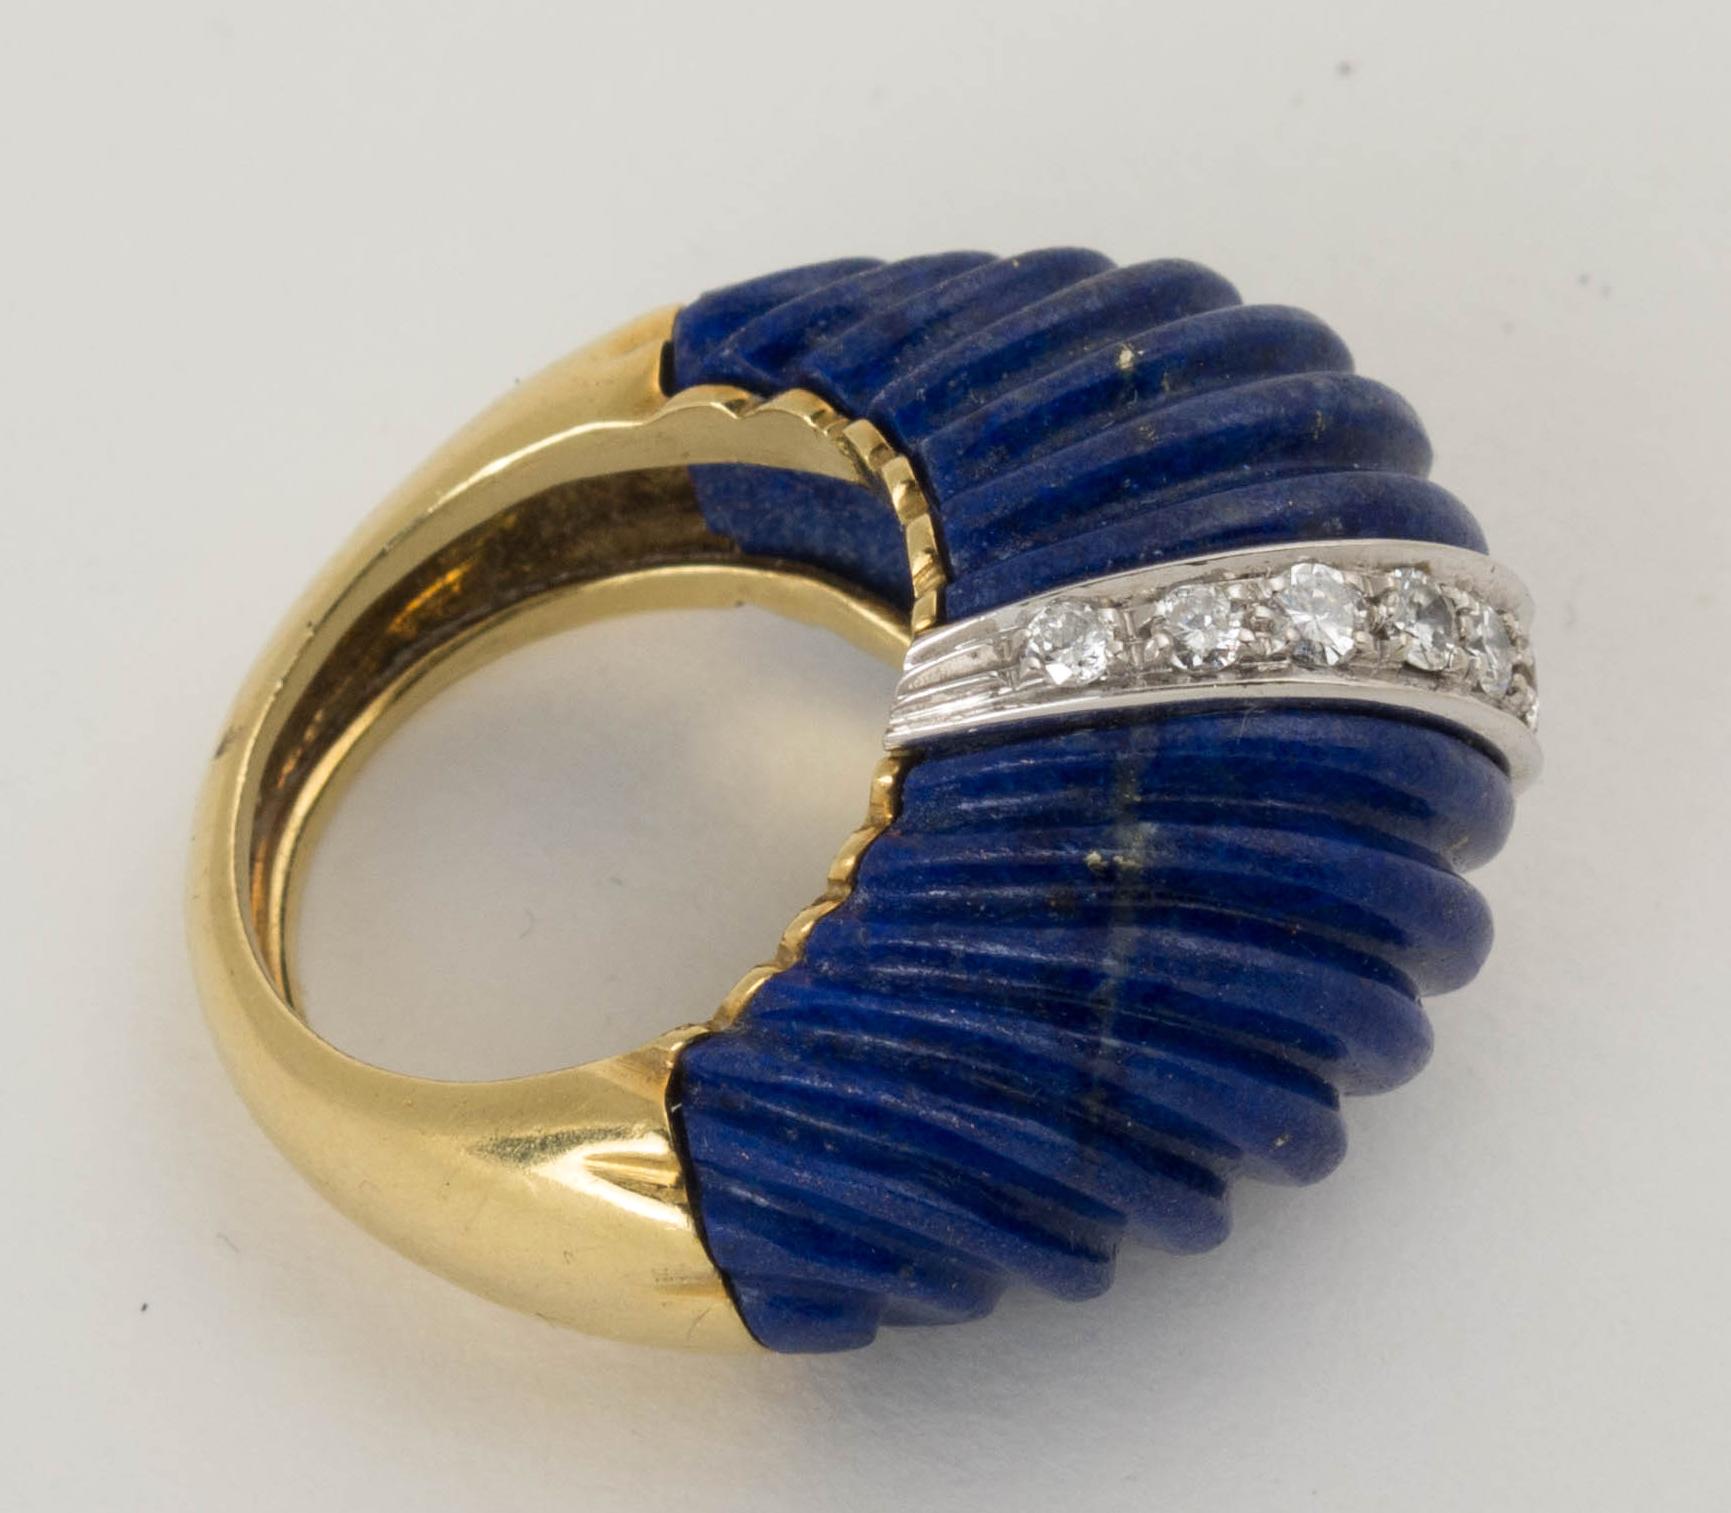 A large and impressive 1980's carved lapis lazuli dome ring set in 18K yellow gold and accented with diamonds.
The high dome of the ring crafted of two sections of carved, deep blue lapis lazuli. The lapis sections joined by a band of 11 round